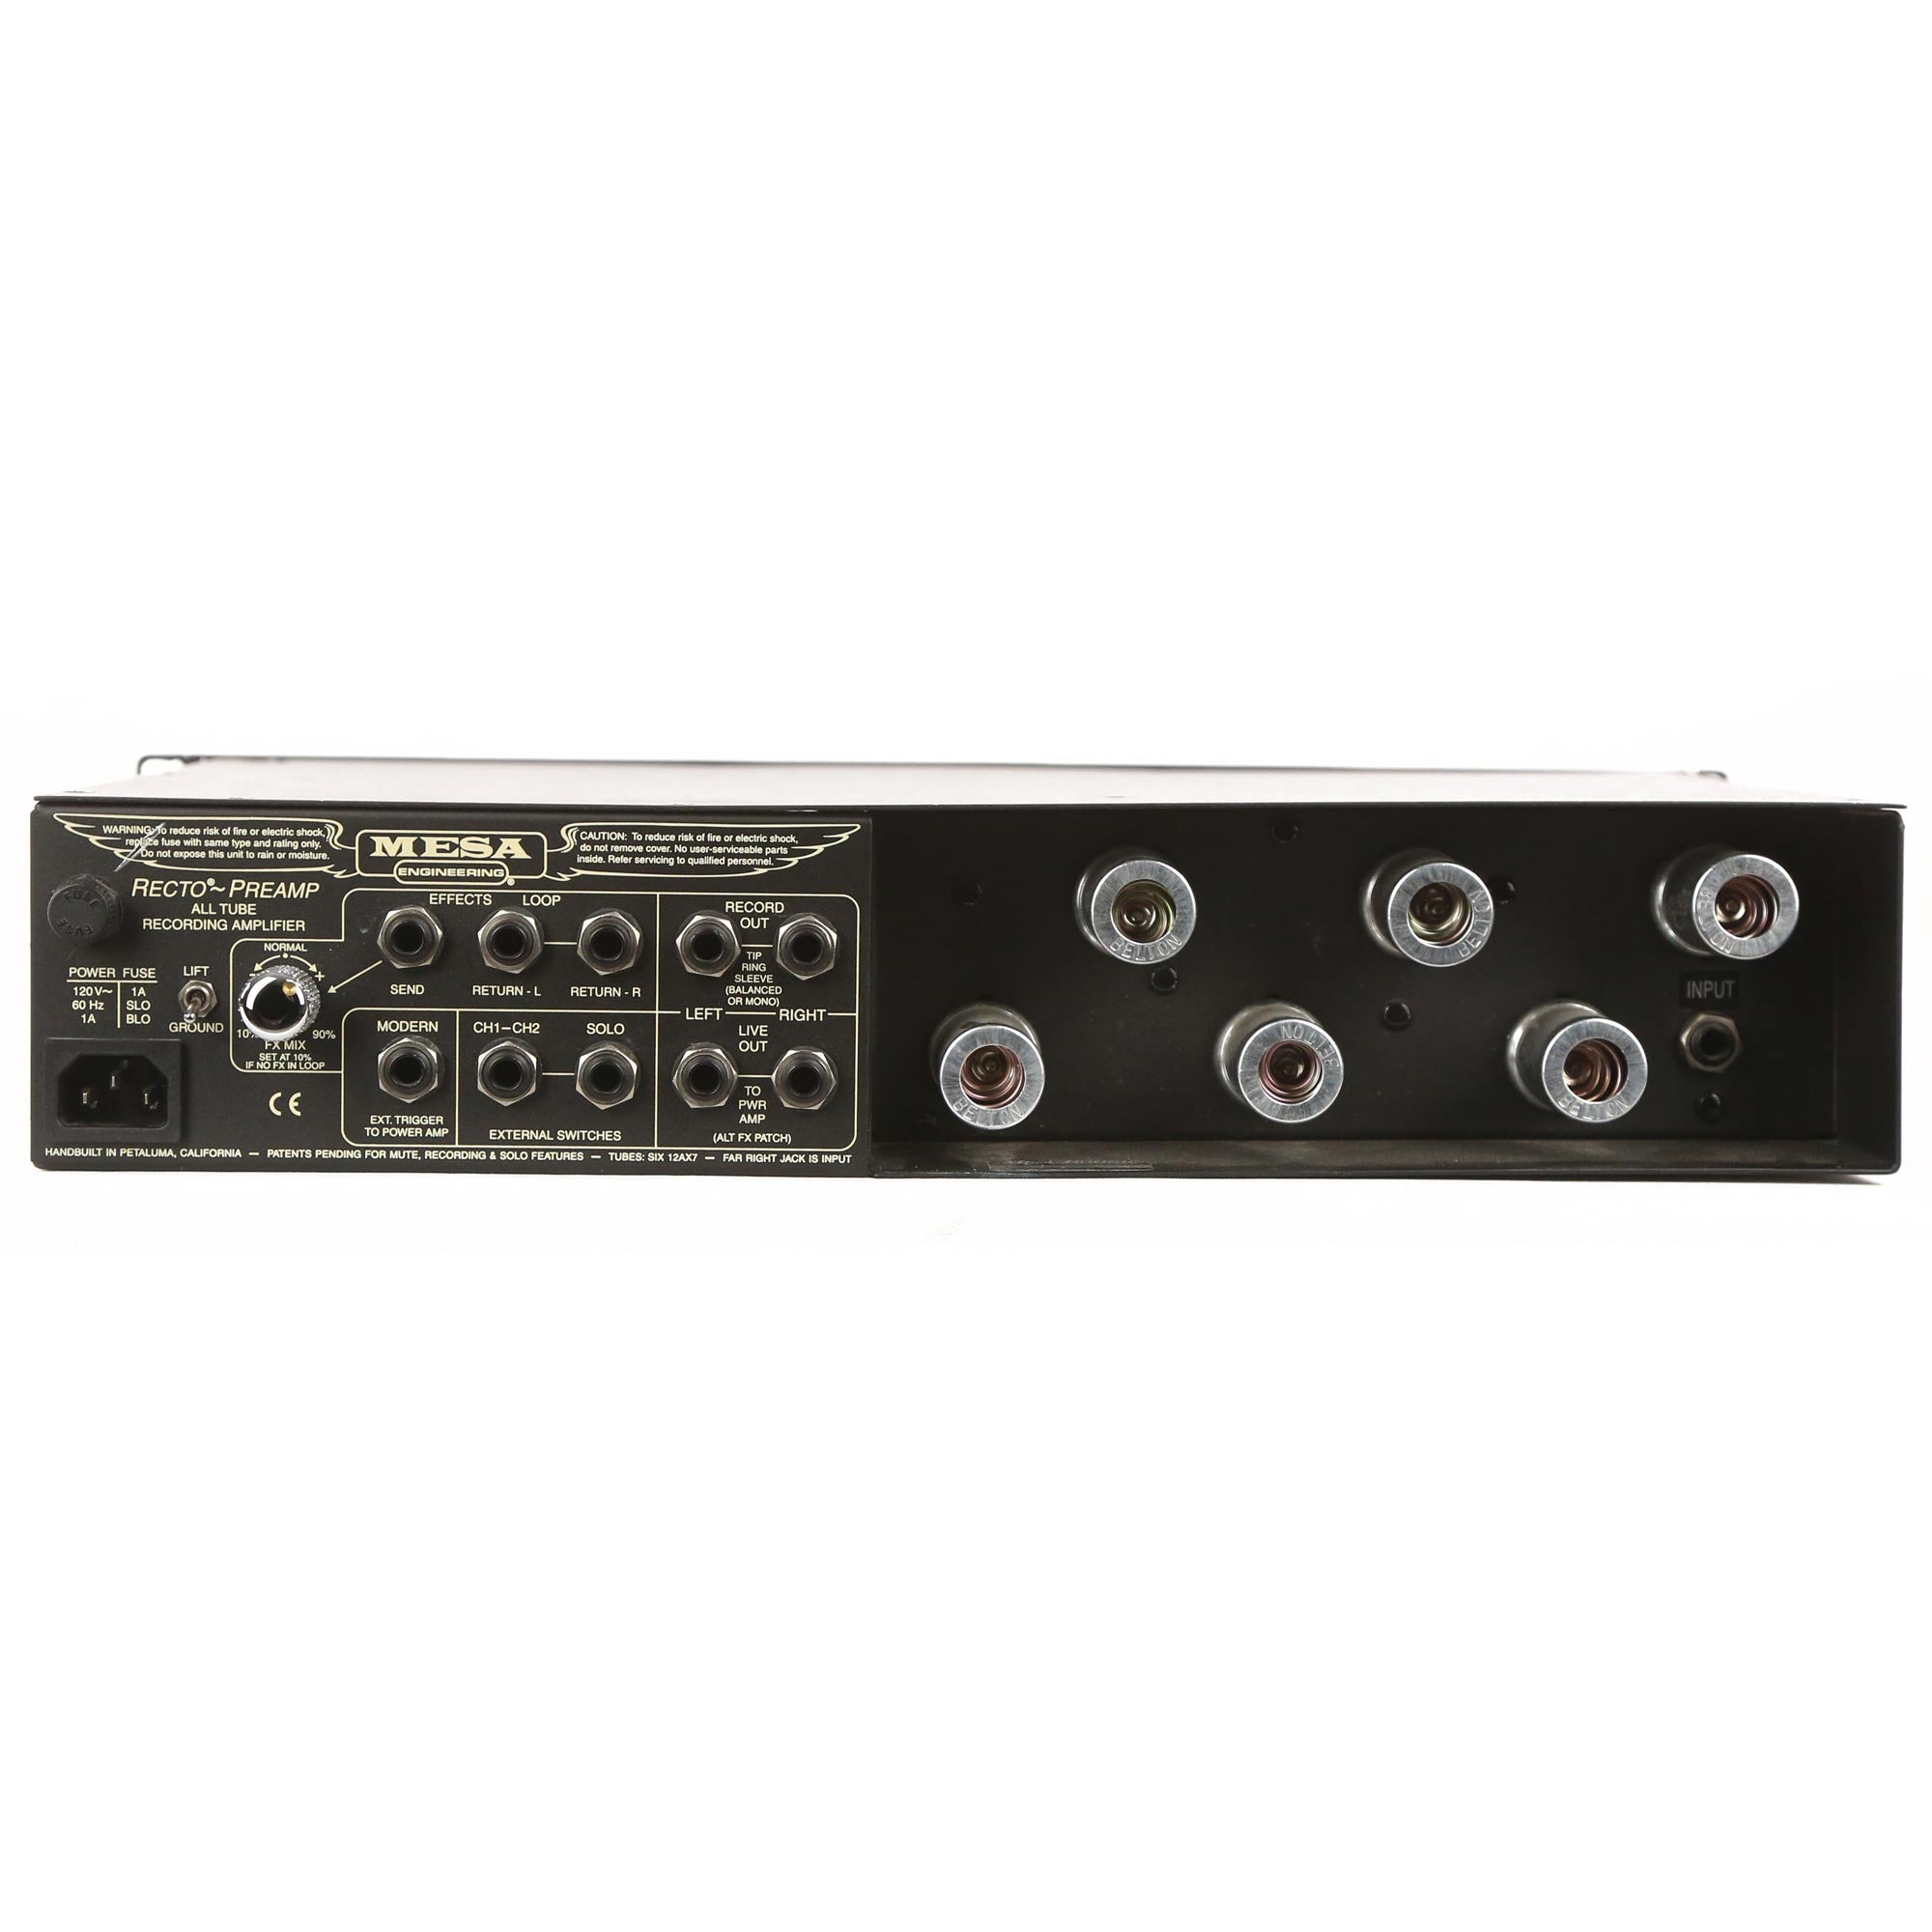 Mesa Boogie Rectifier Recording Preamp Used | The Music Zoo